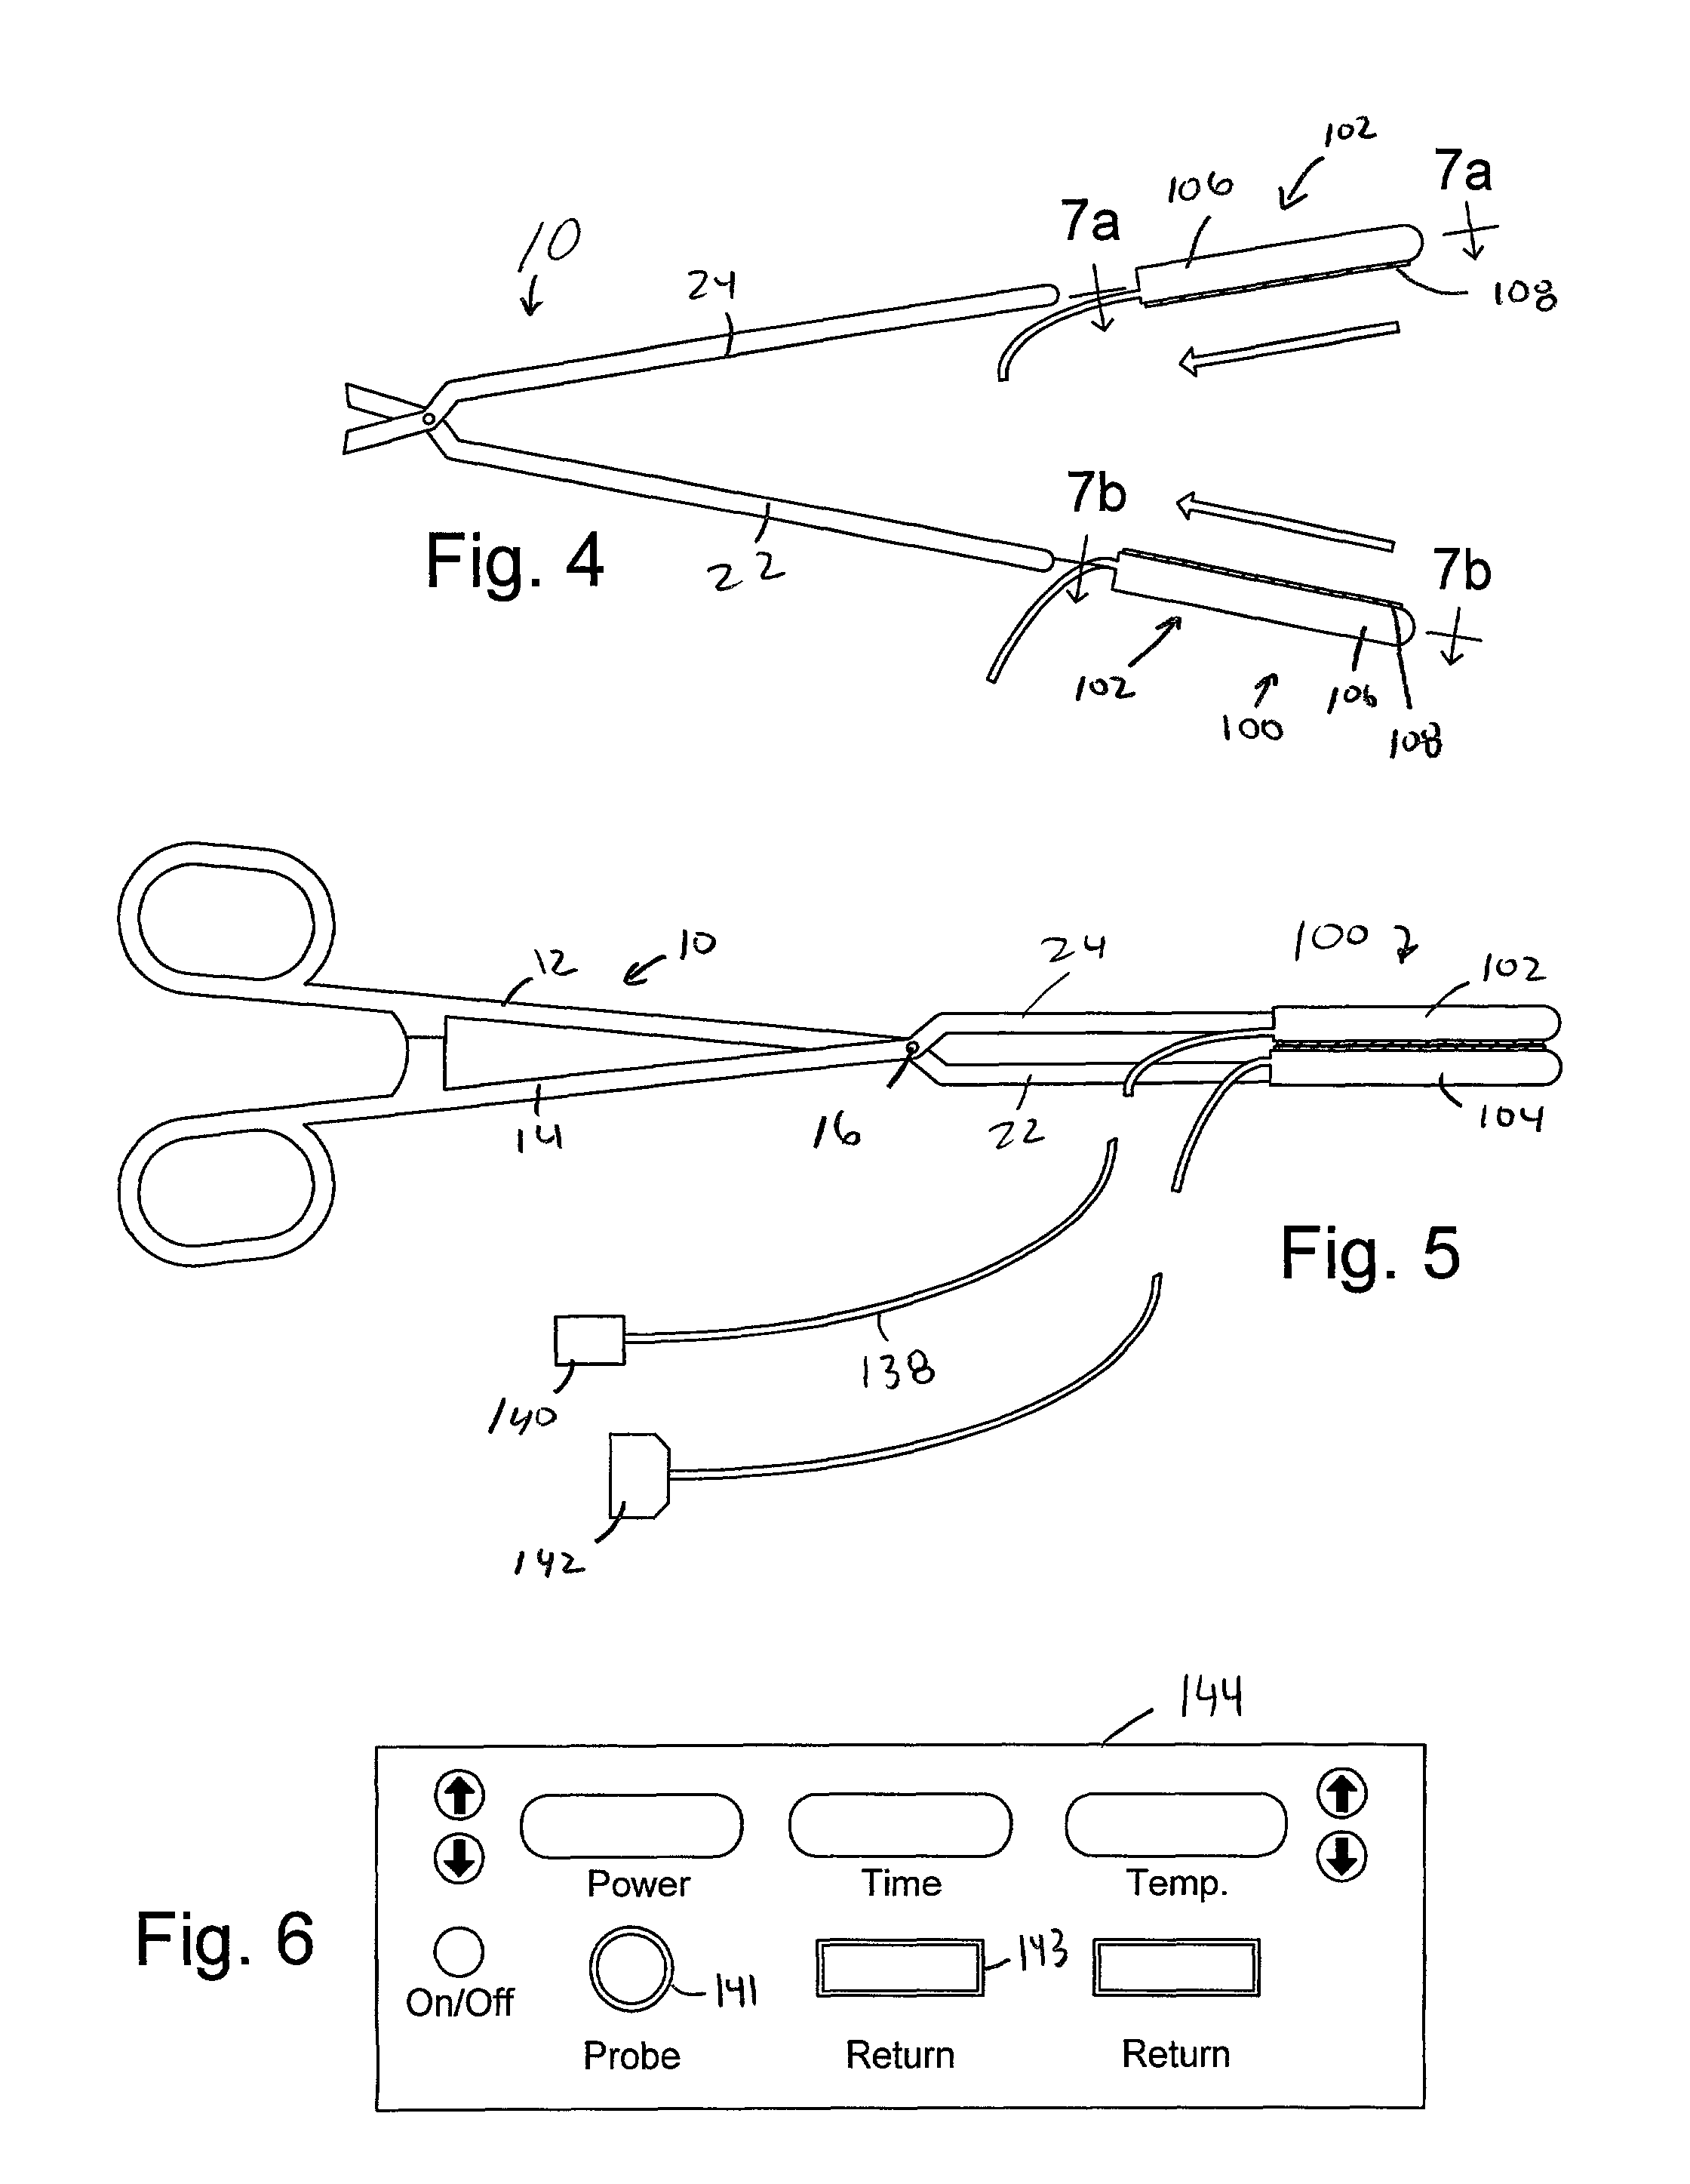 Apparatus for securing an electrophysiology probe to a clamp